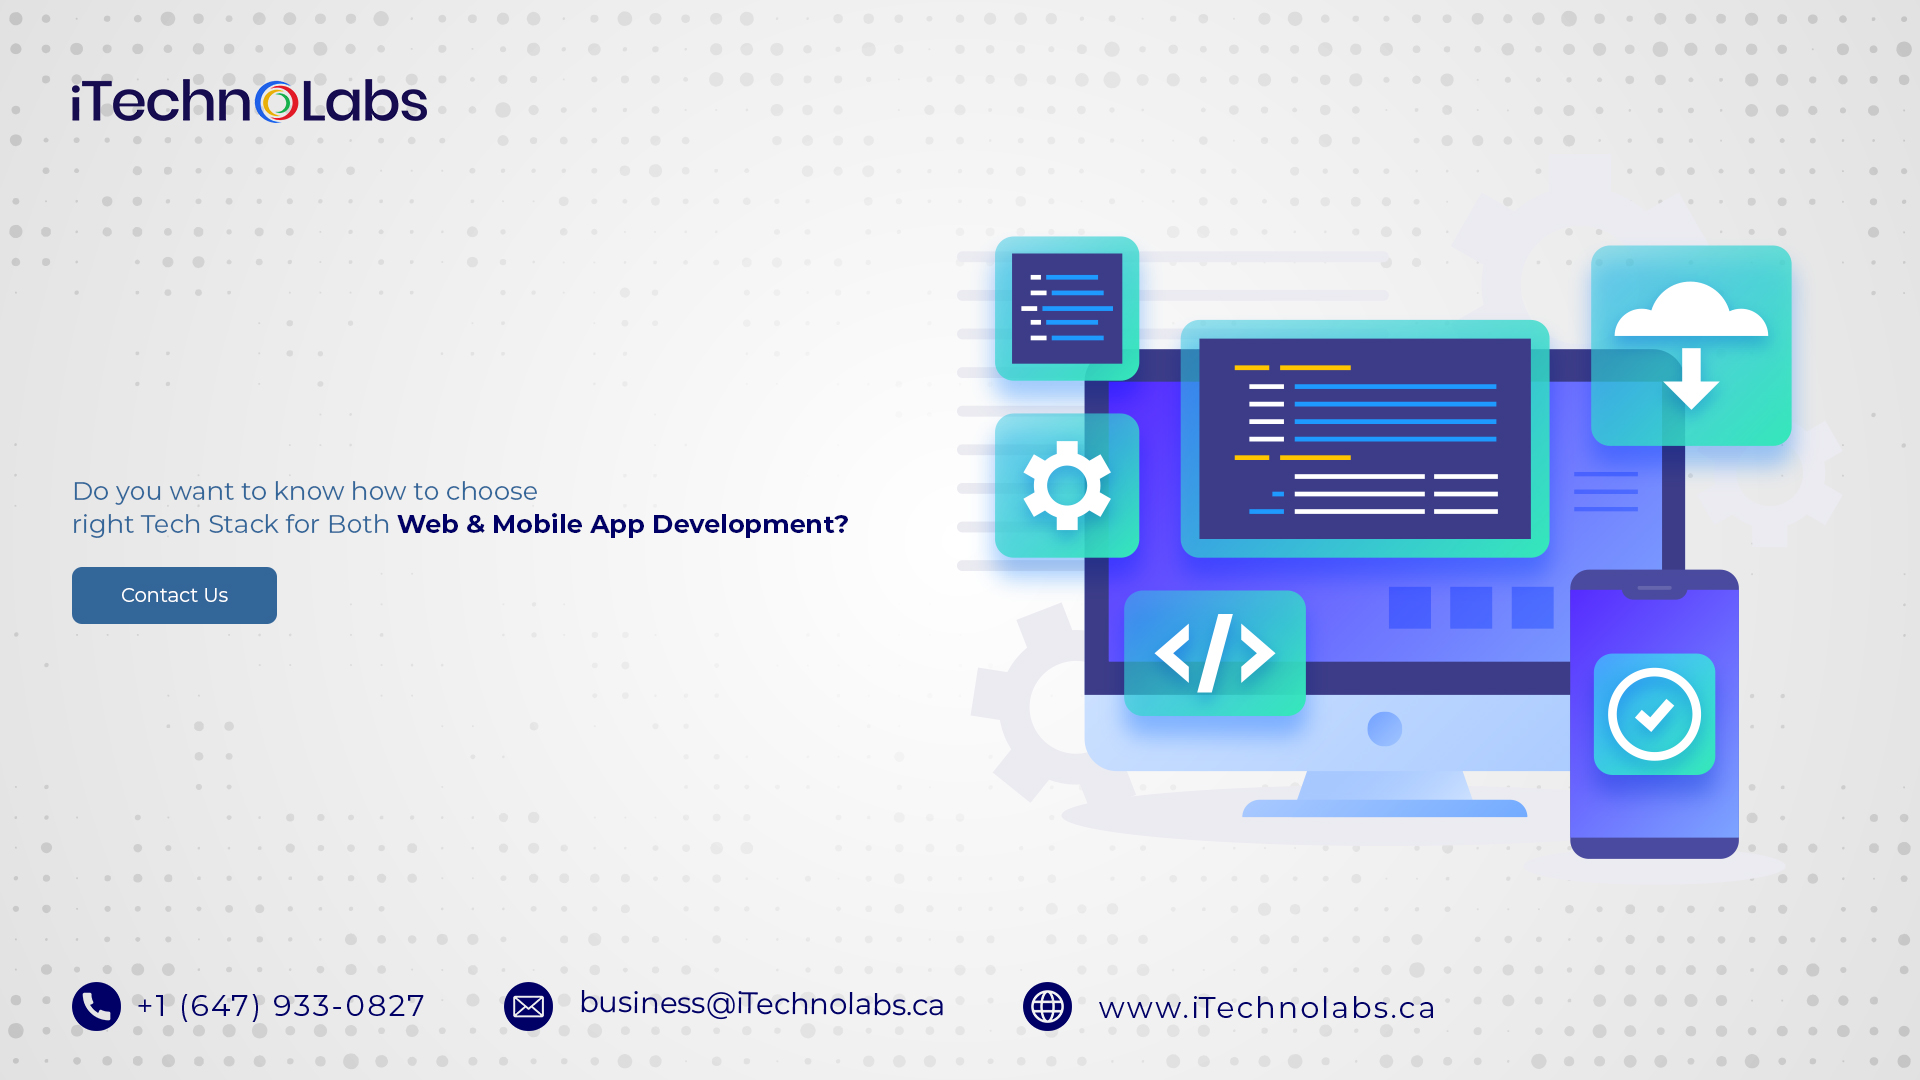 do you want to know how to choose right tech stack for both web & mobile app development itechnolabs